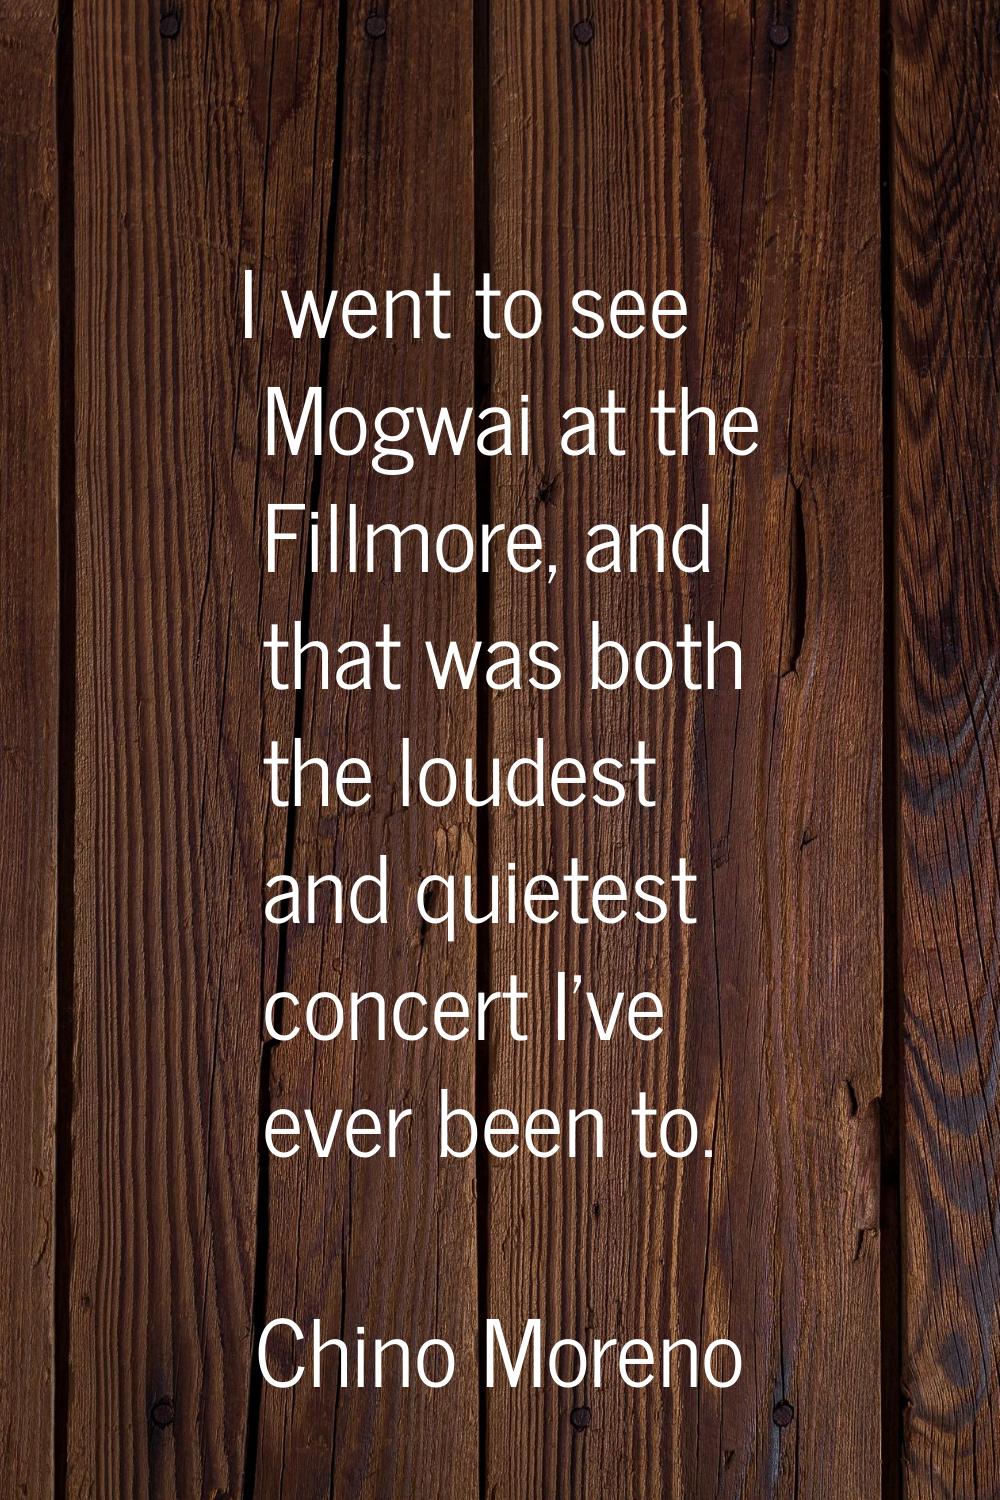 I went to see Mogwai at the Fillmore, and that was both the loudest and quietest concert I've ever 